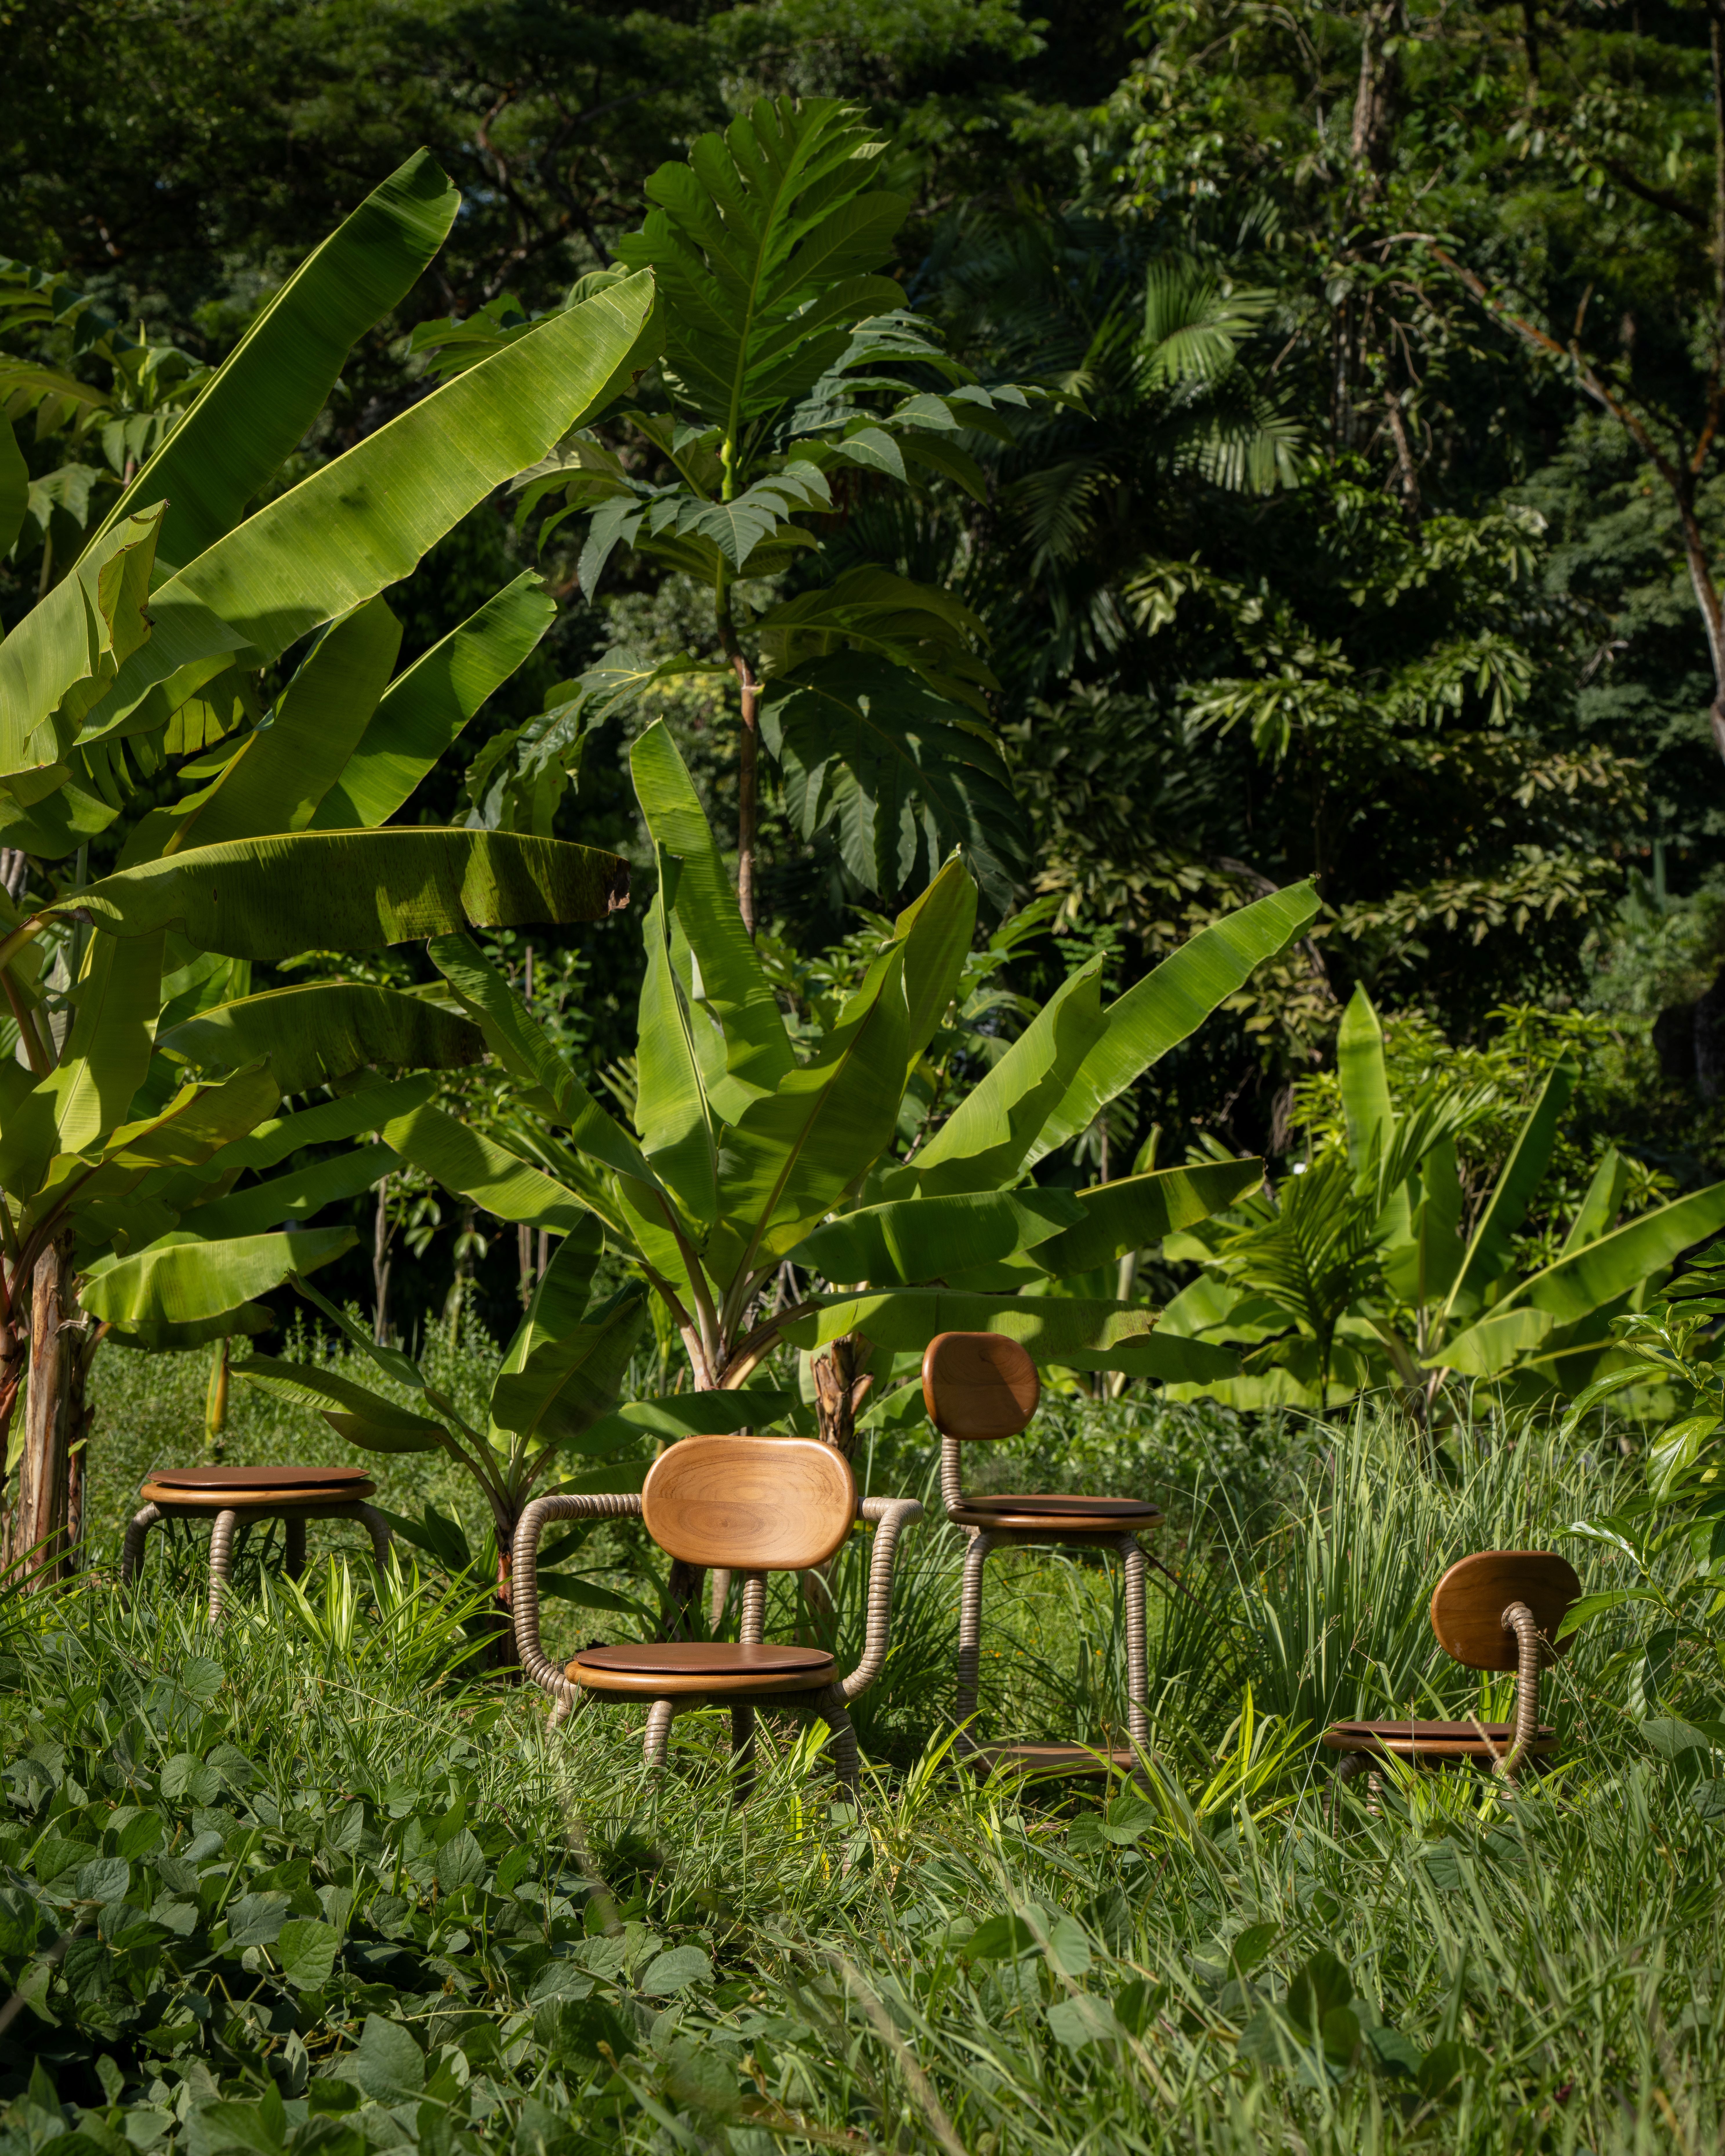 A series of wooden chairs surrounded by nature